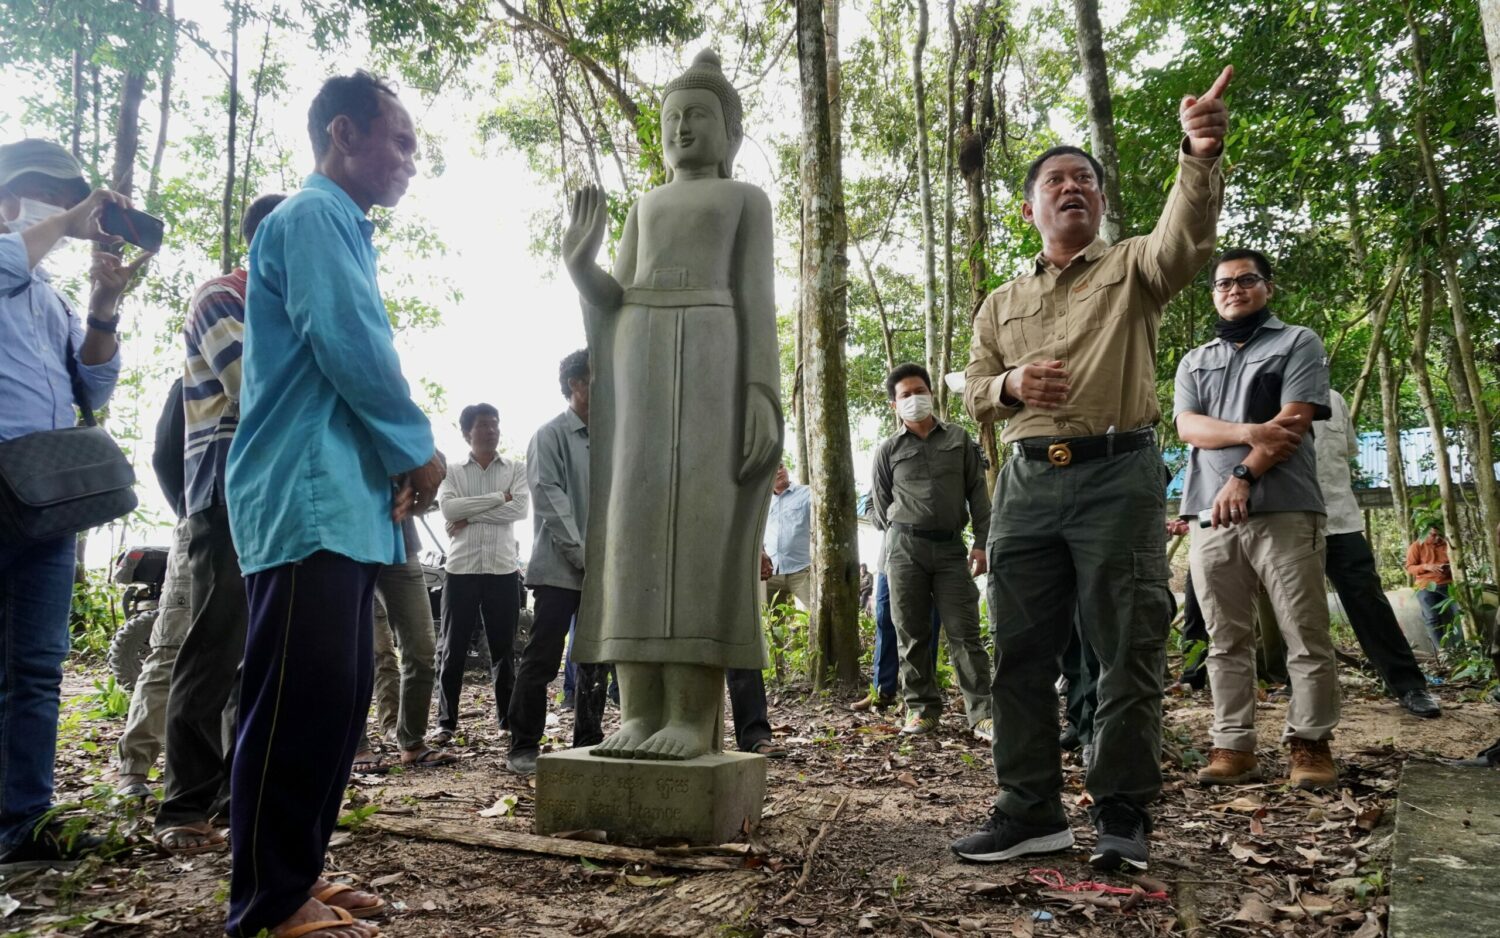 Governor Vei Samnang speaks to community residents in Kampong Speu's Metta forest on August 9, 2022. (Hean Rangsey/VOD)